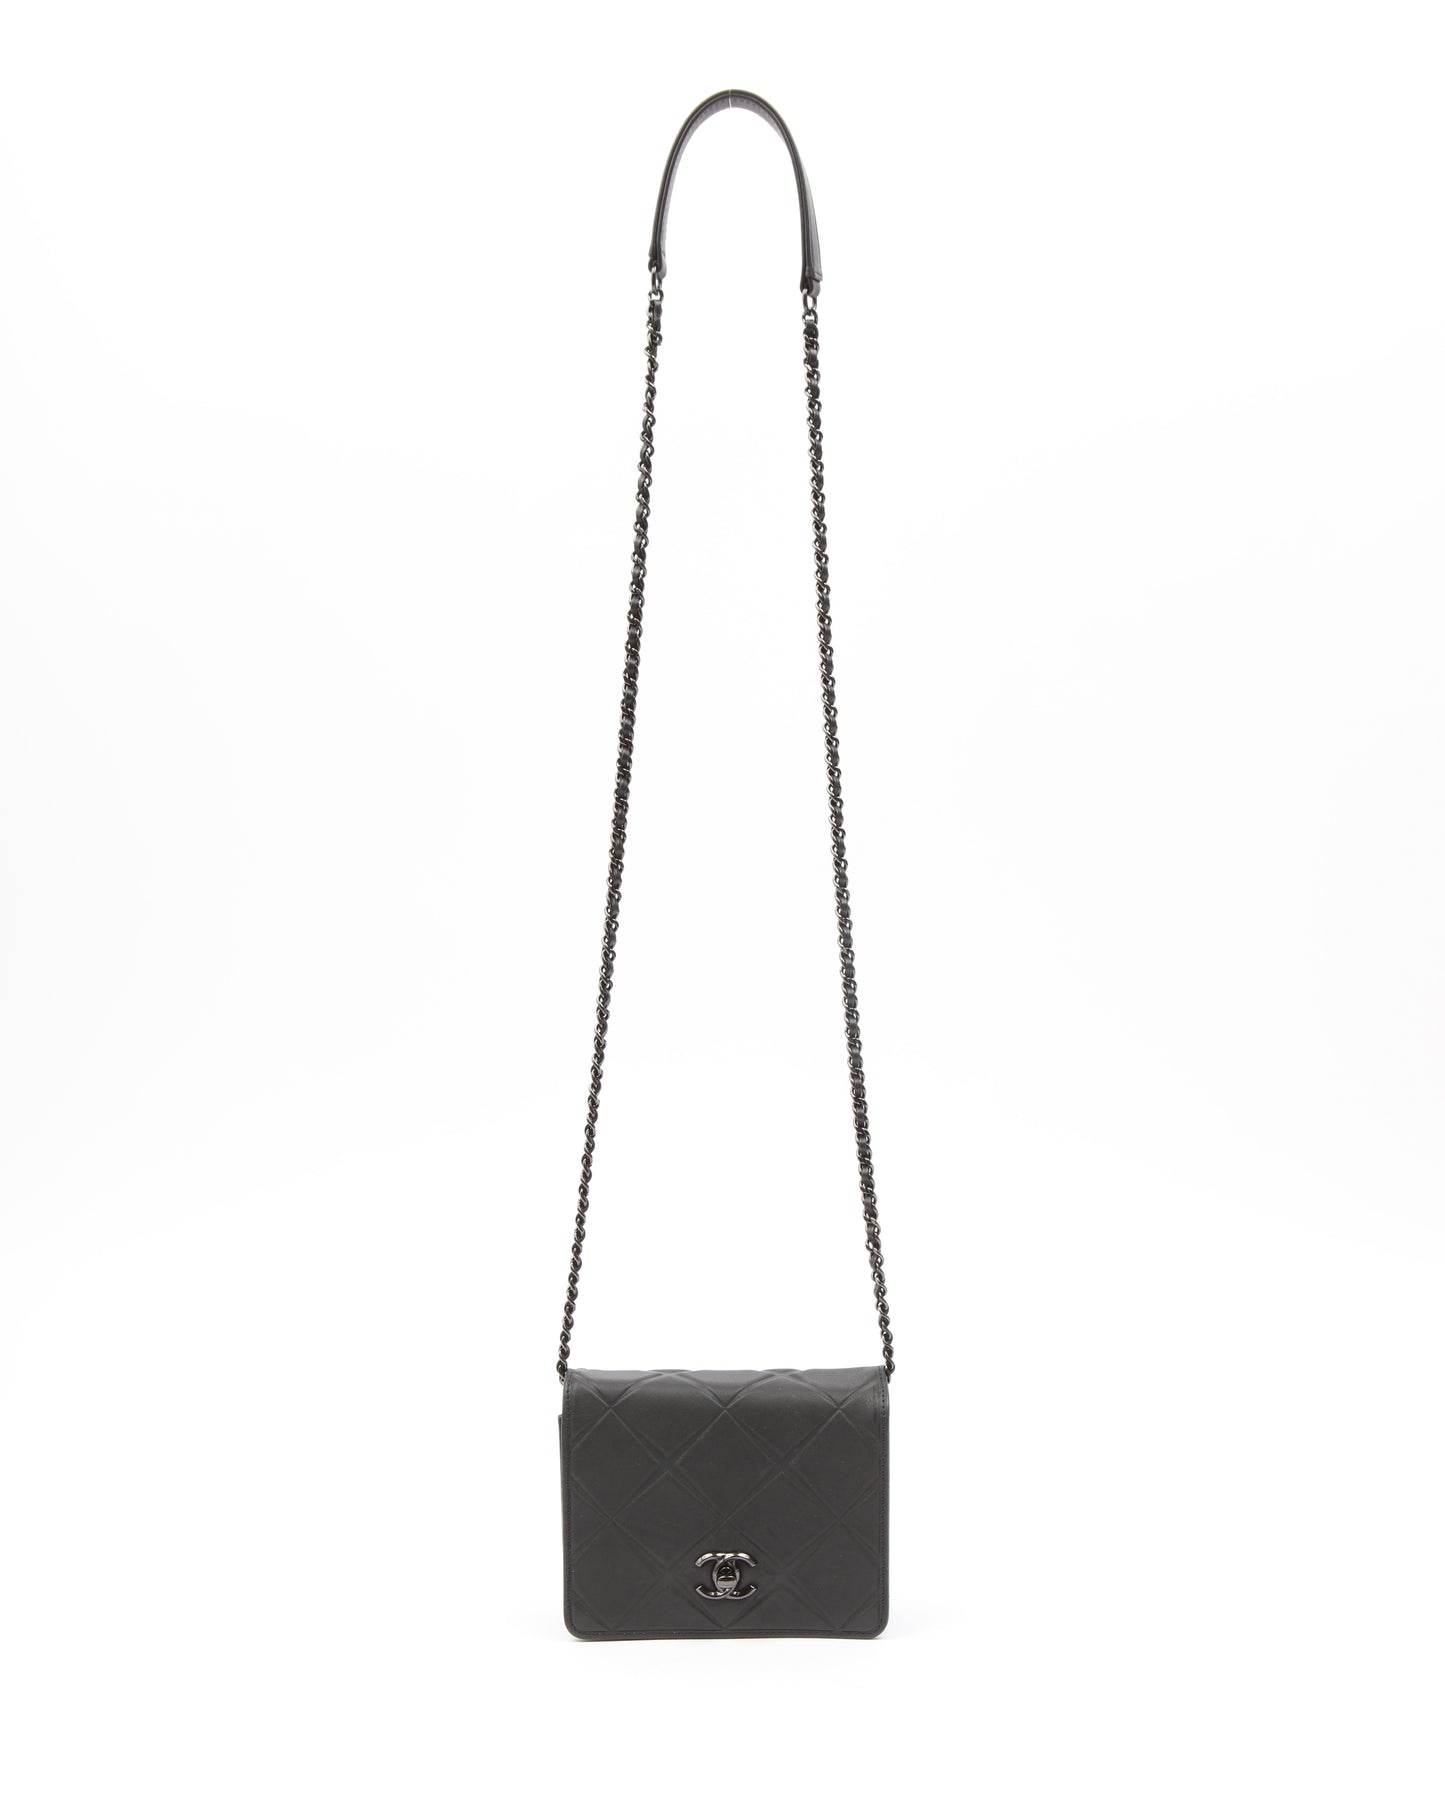 Chanel All Black Propeller Leather Square Very Debossed Chain Crossbody Bag